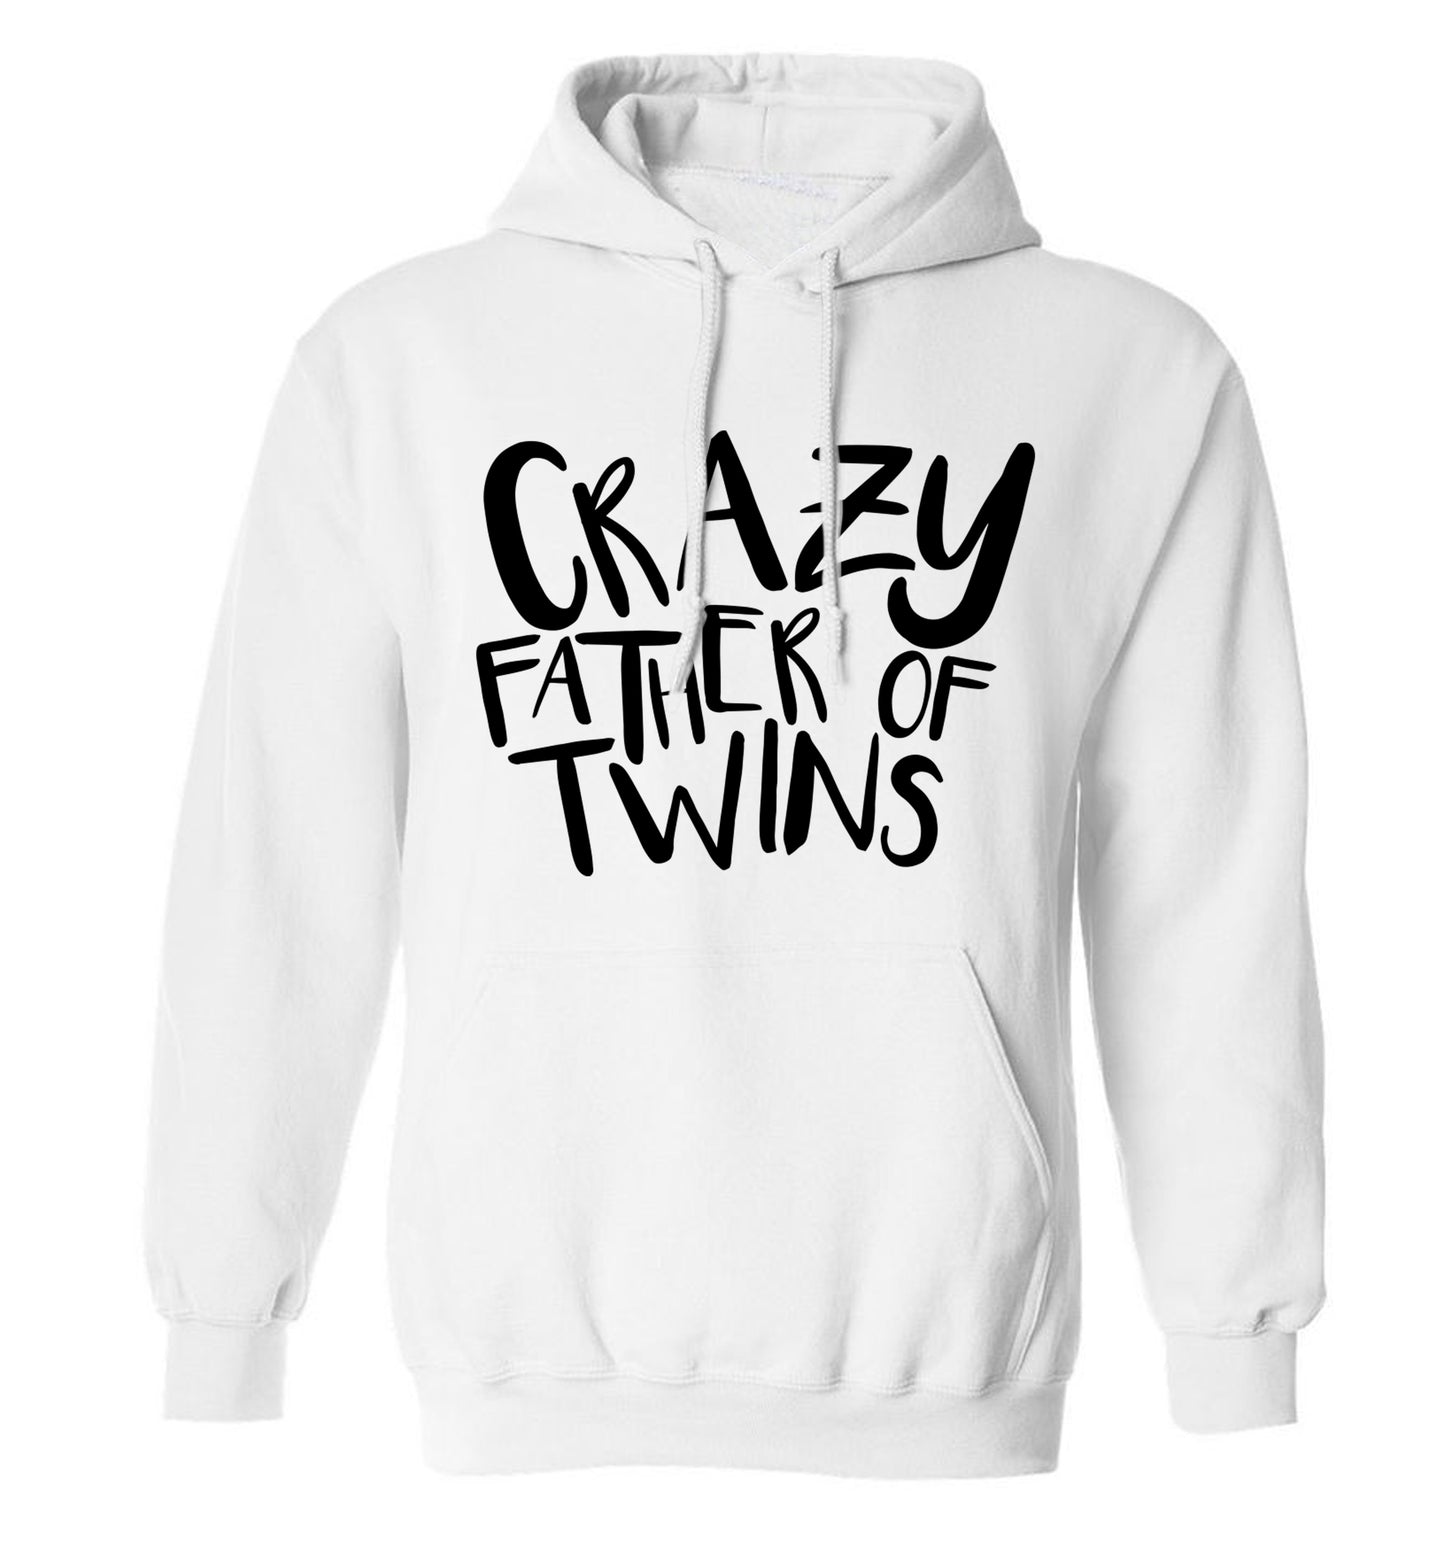 Crazy father of twins adults unisex white hoodie 2XL